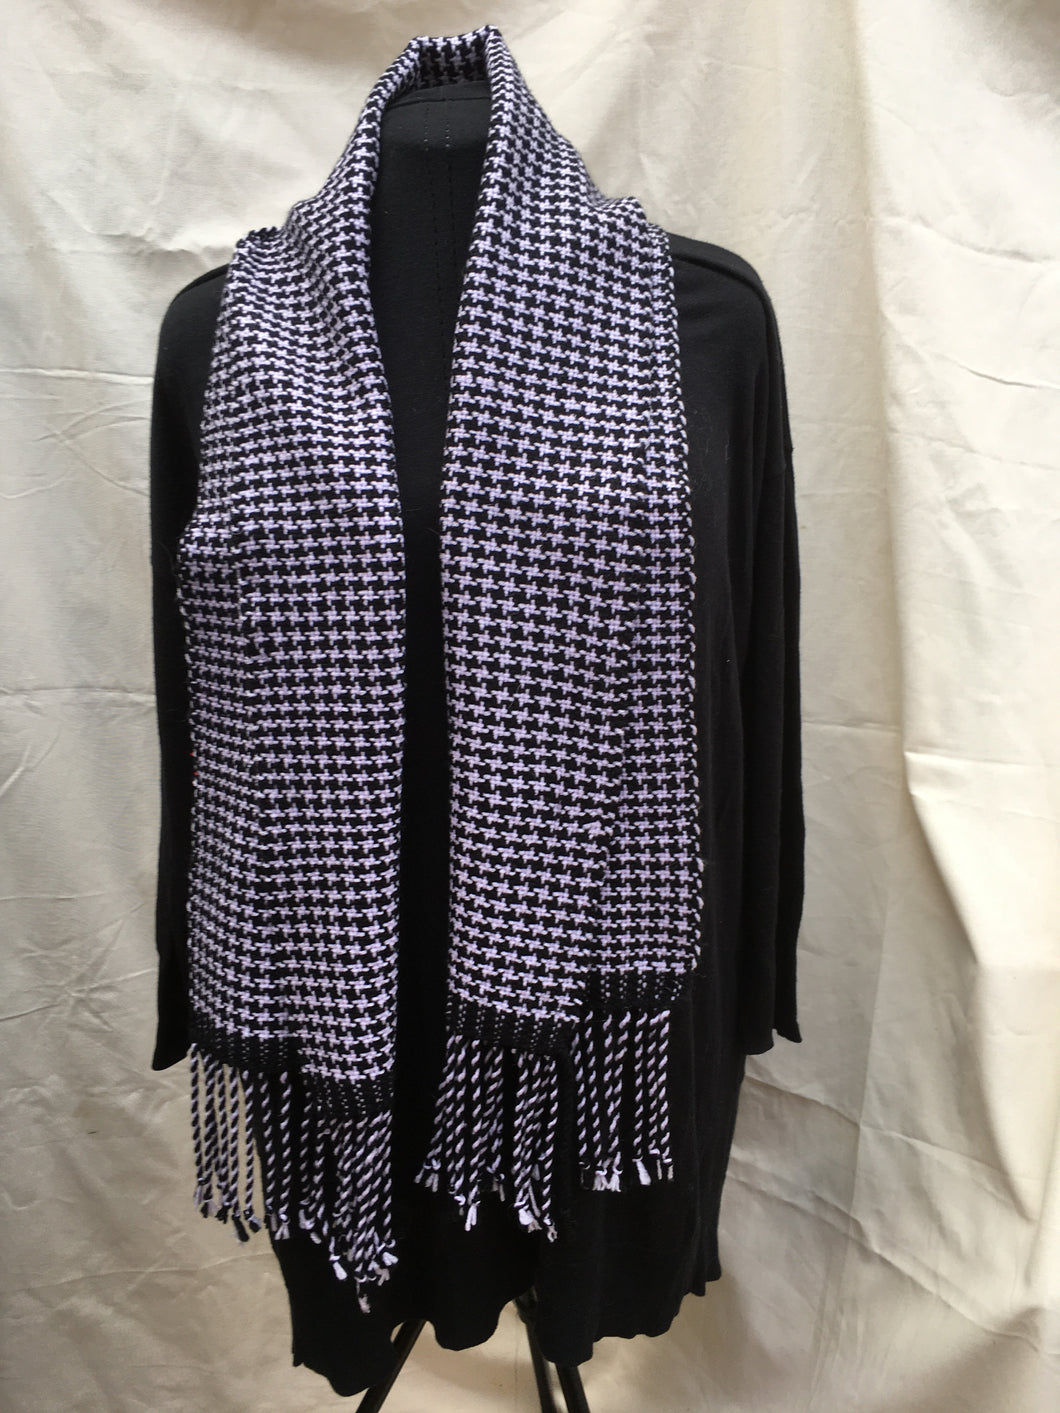 Light scarf - houndstooth weave